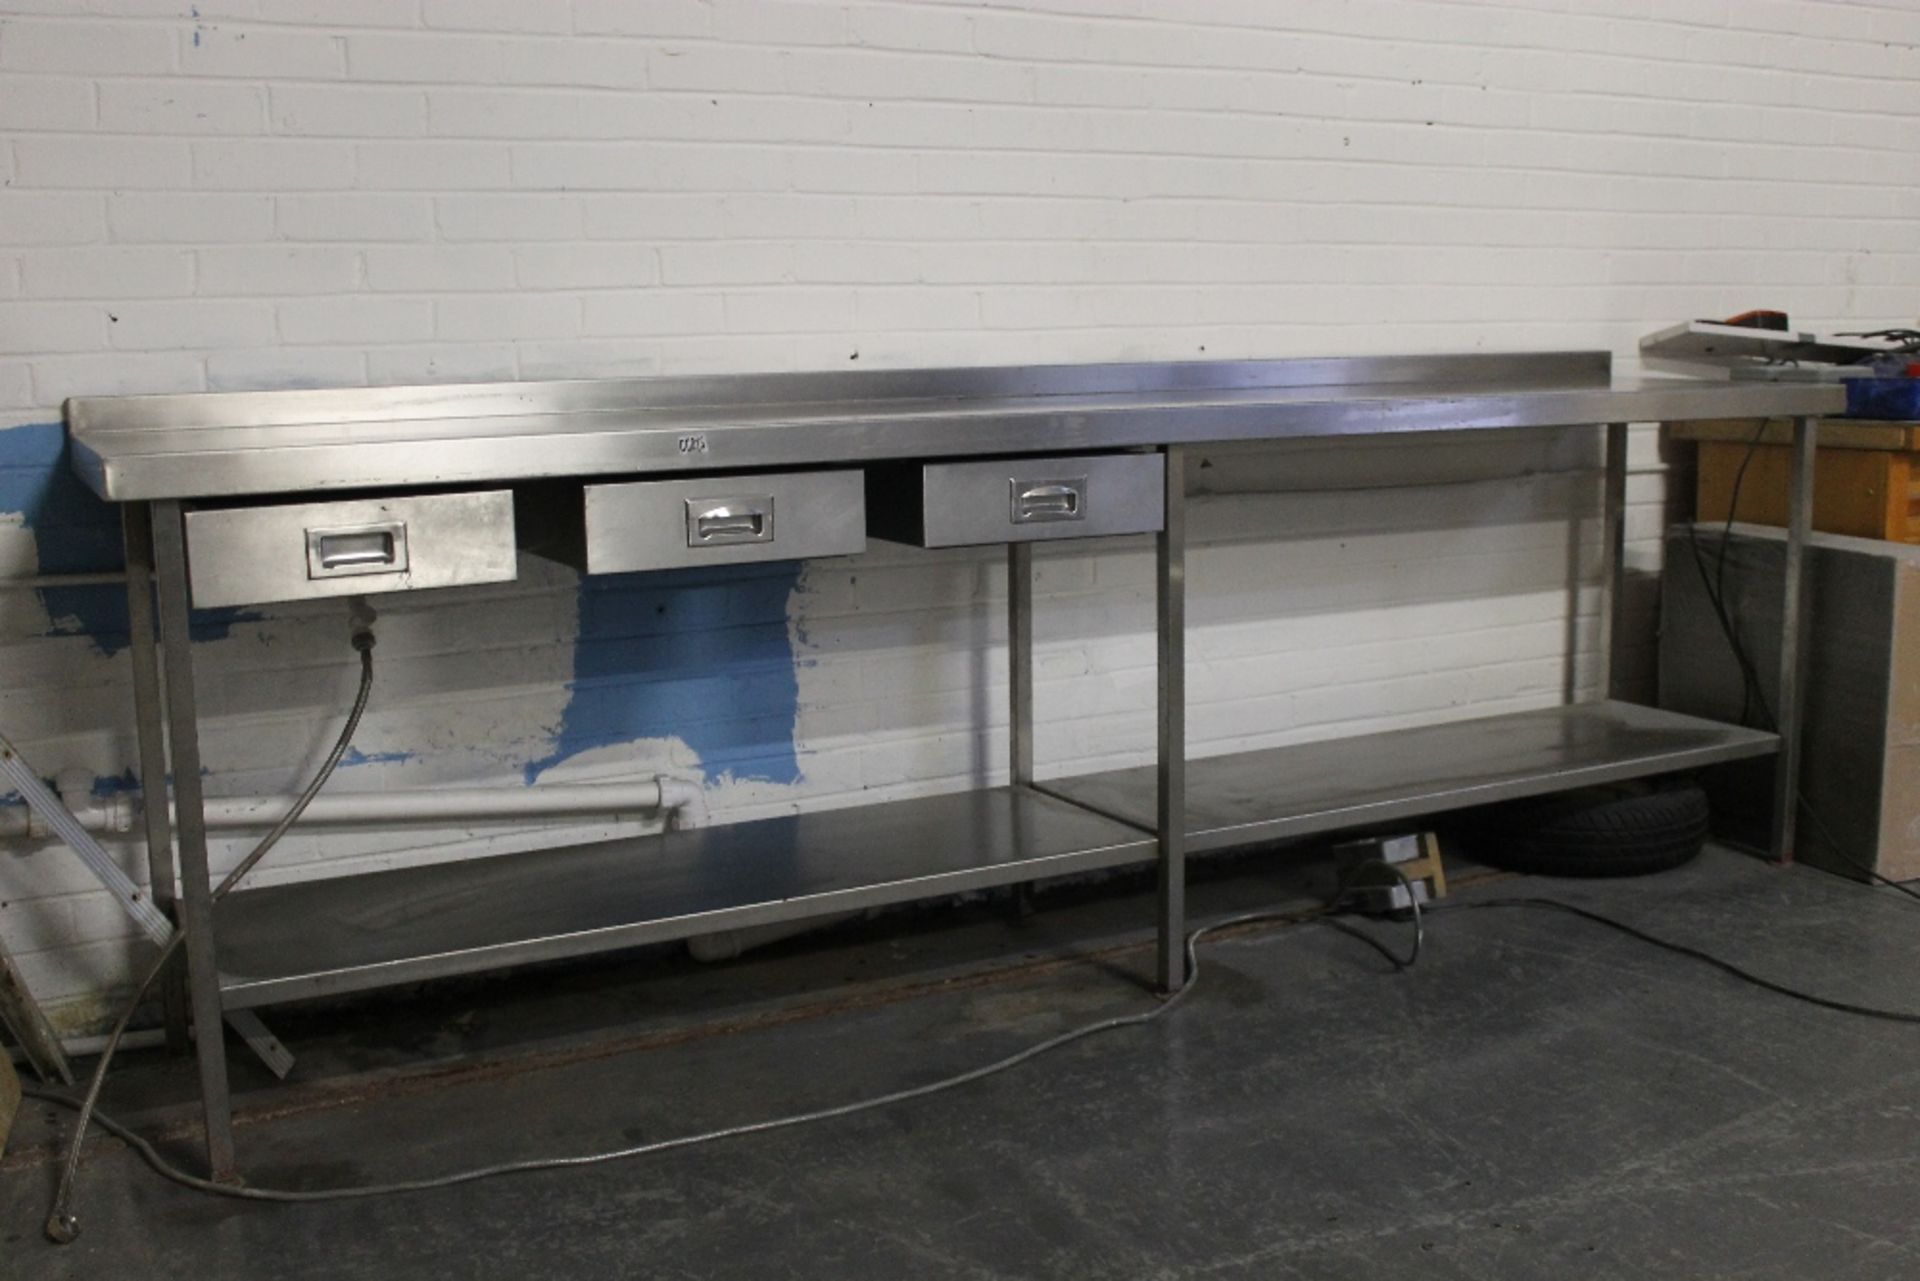 Stainless Steel Table with 3 Drawers + Under Shelf – Drawers missing bottoms W290cmxH95cmxD62cm